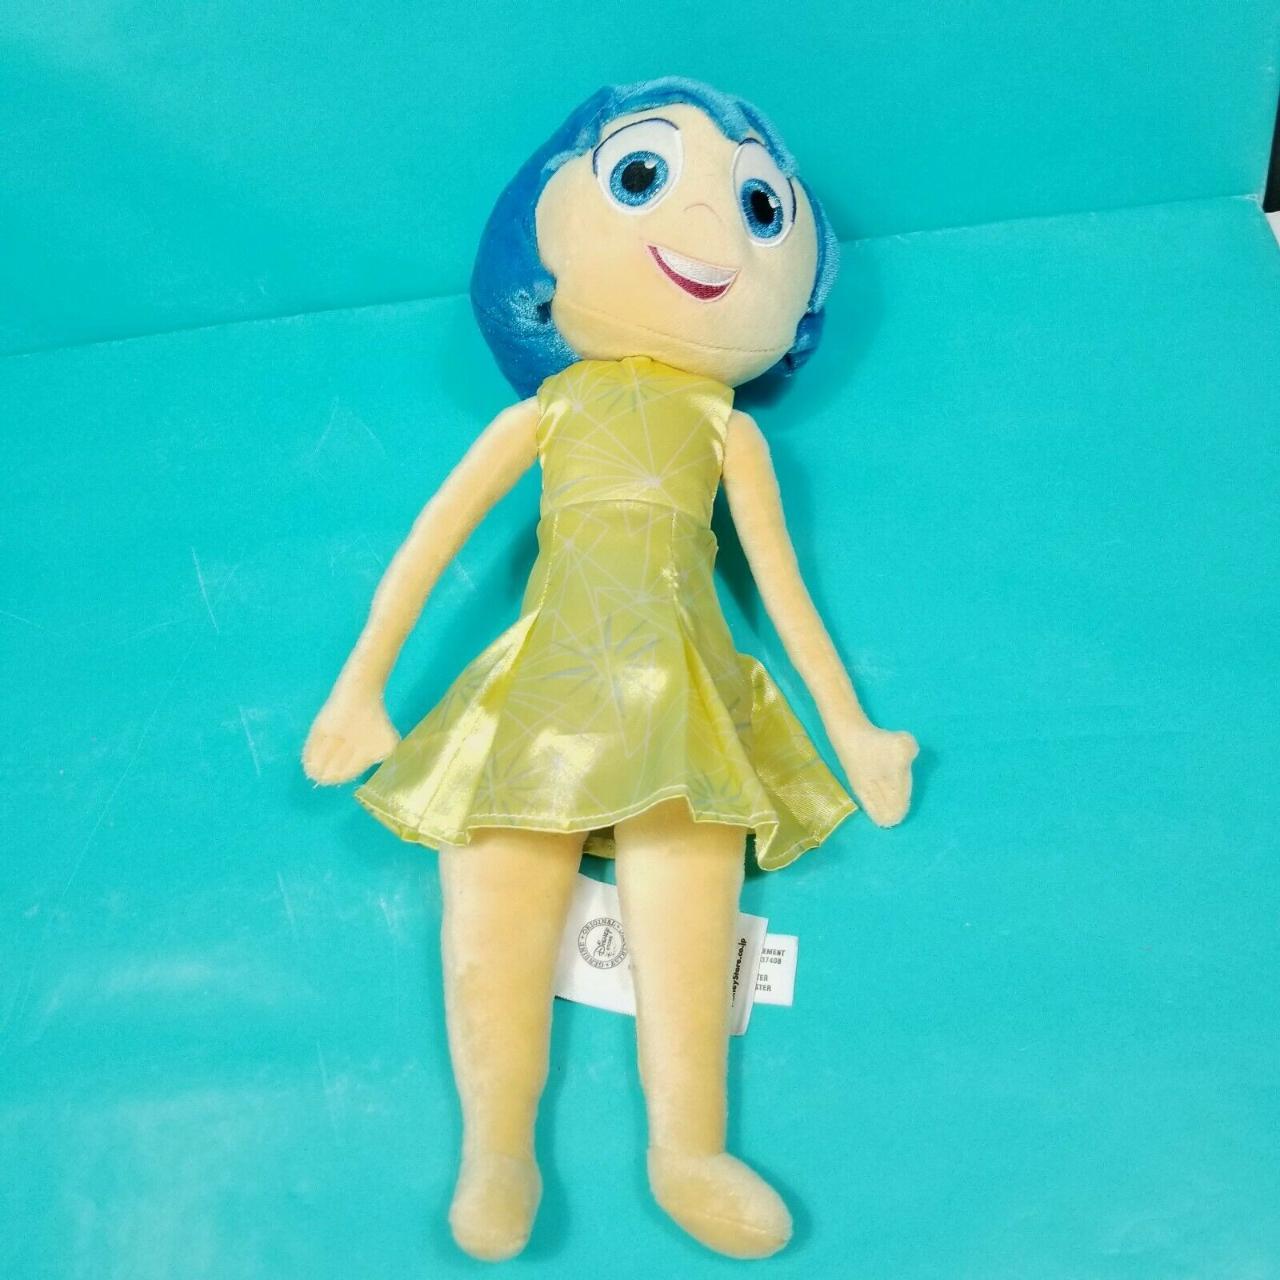 NEW 14" Genuine Disney Store Exclusive Inside Out Small JOY Plush Toy Doll 